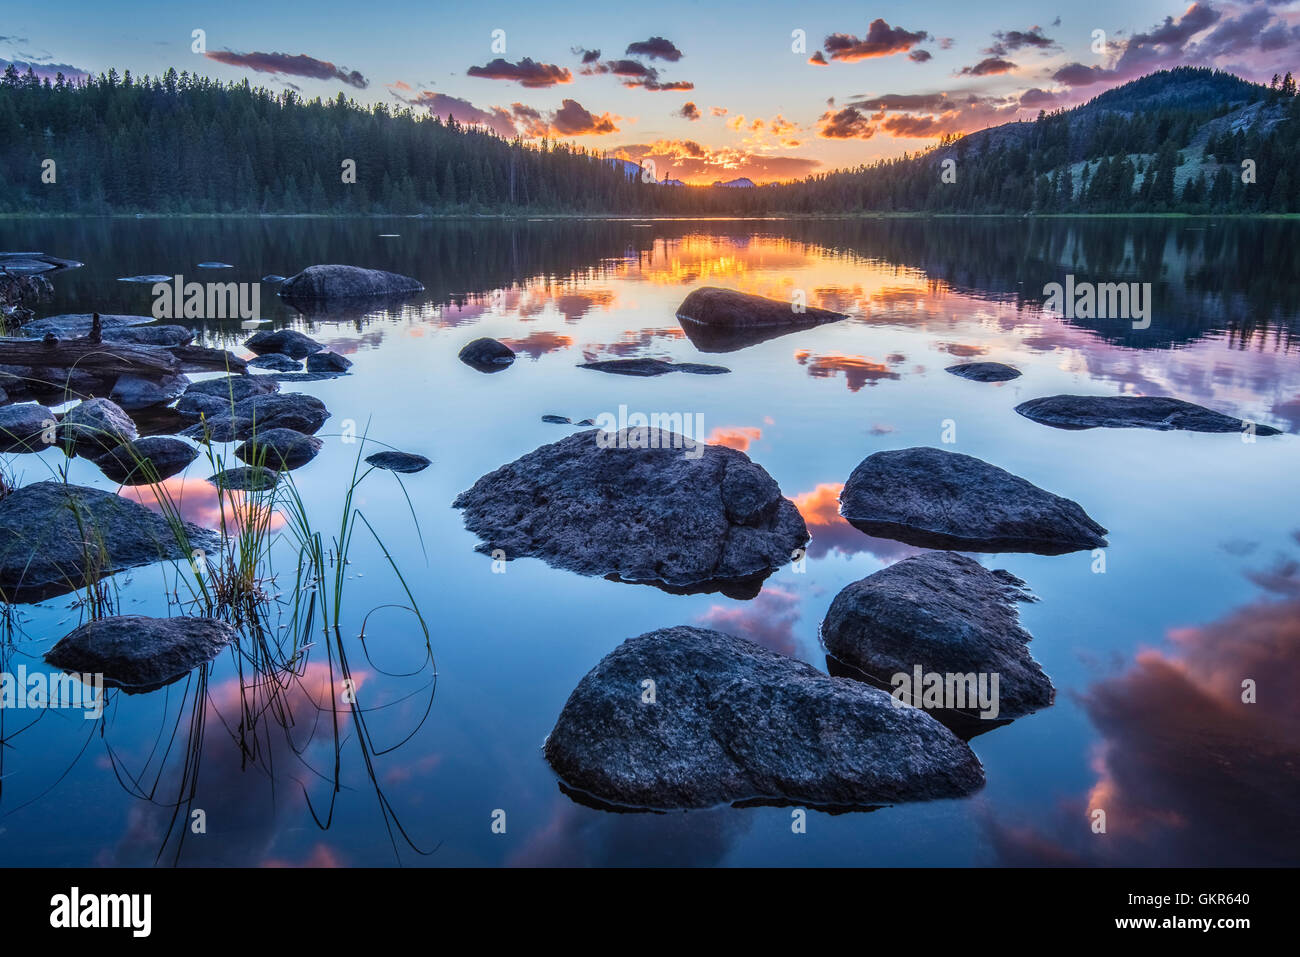 Sunset at Lily Lake, Shoshone National Forest, Wyoming. Stock Photo